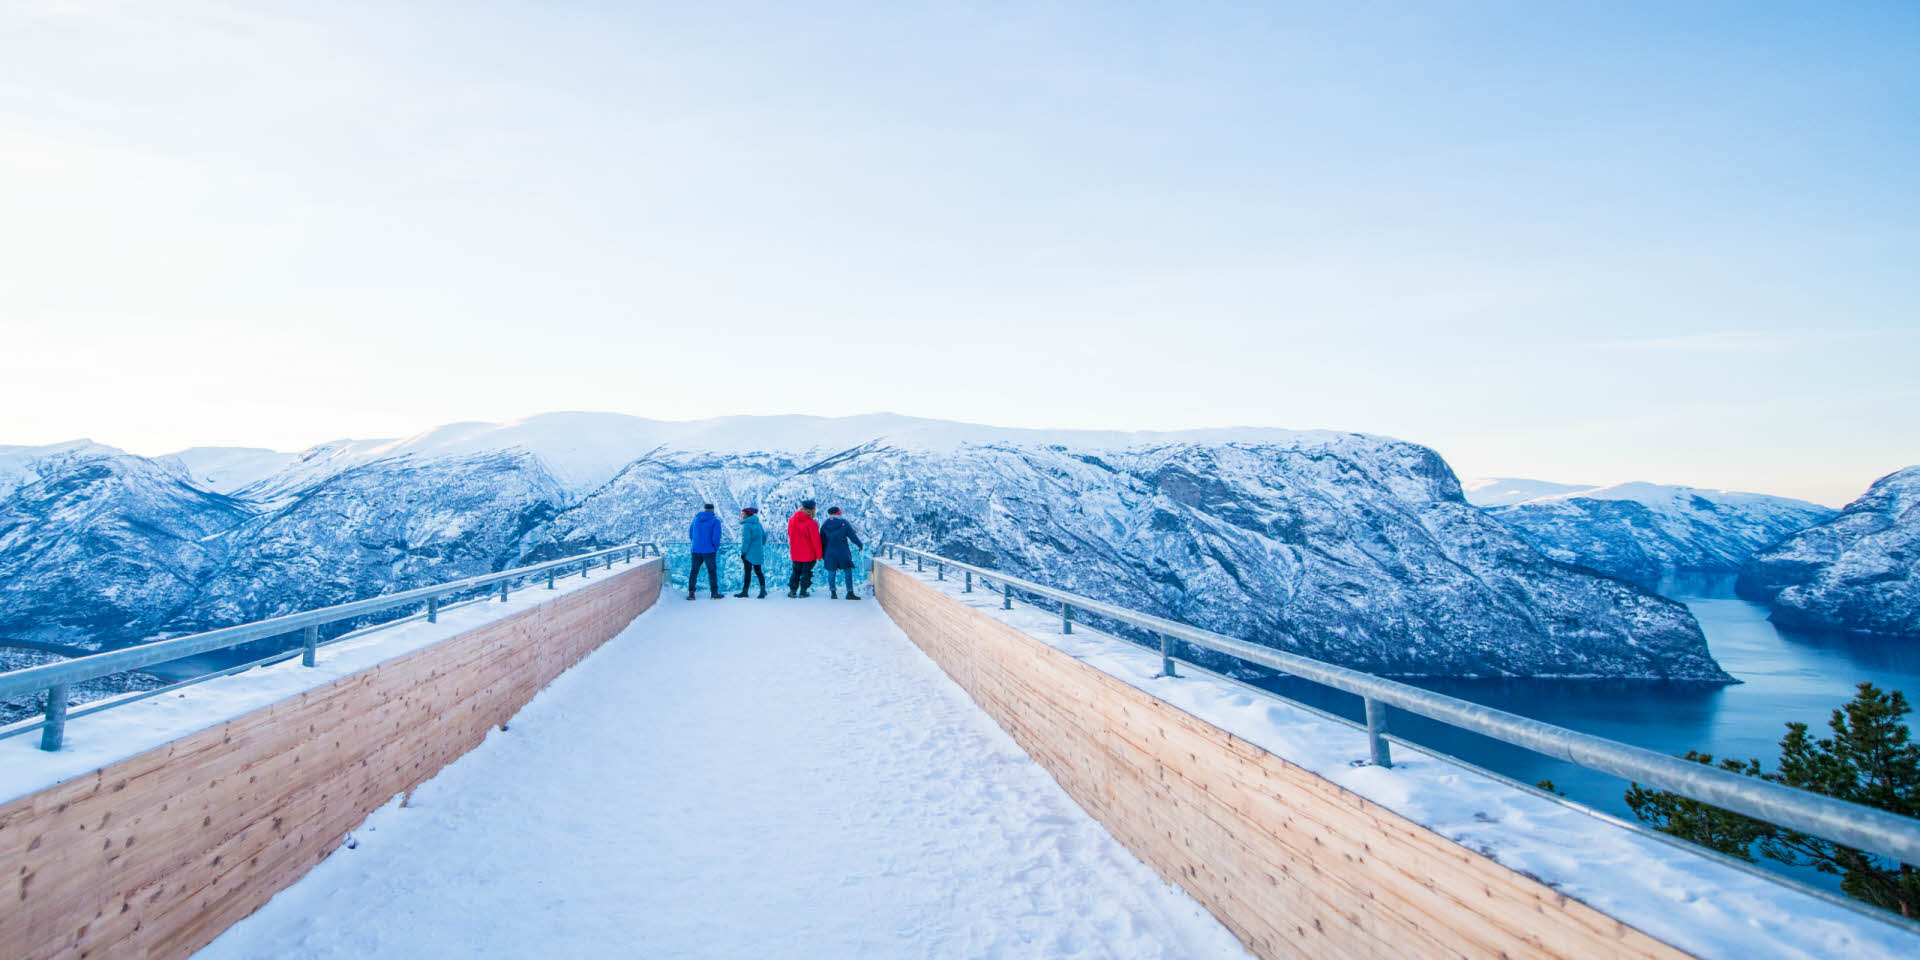 Stegastein in winter. Four people looking over Aurlandsfjord and winter landscape